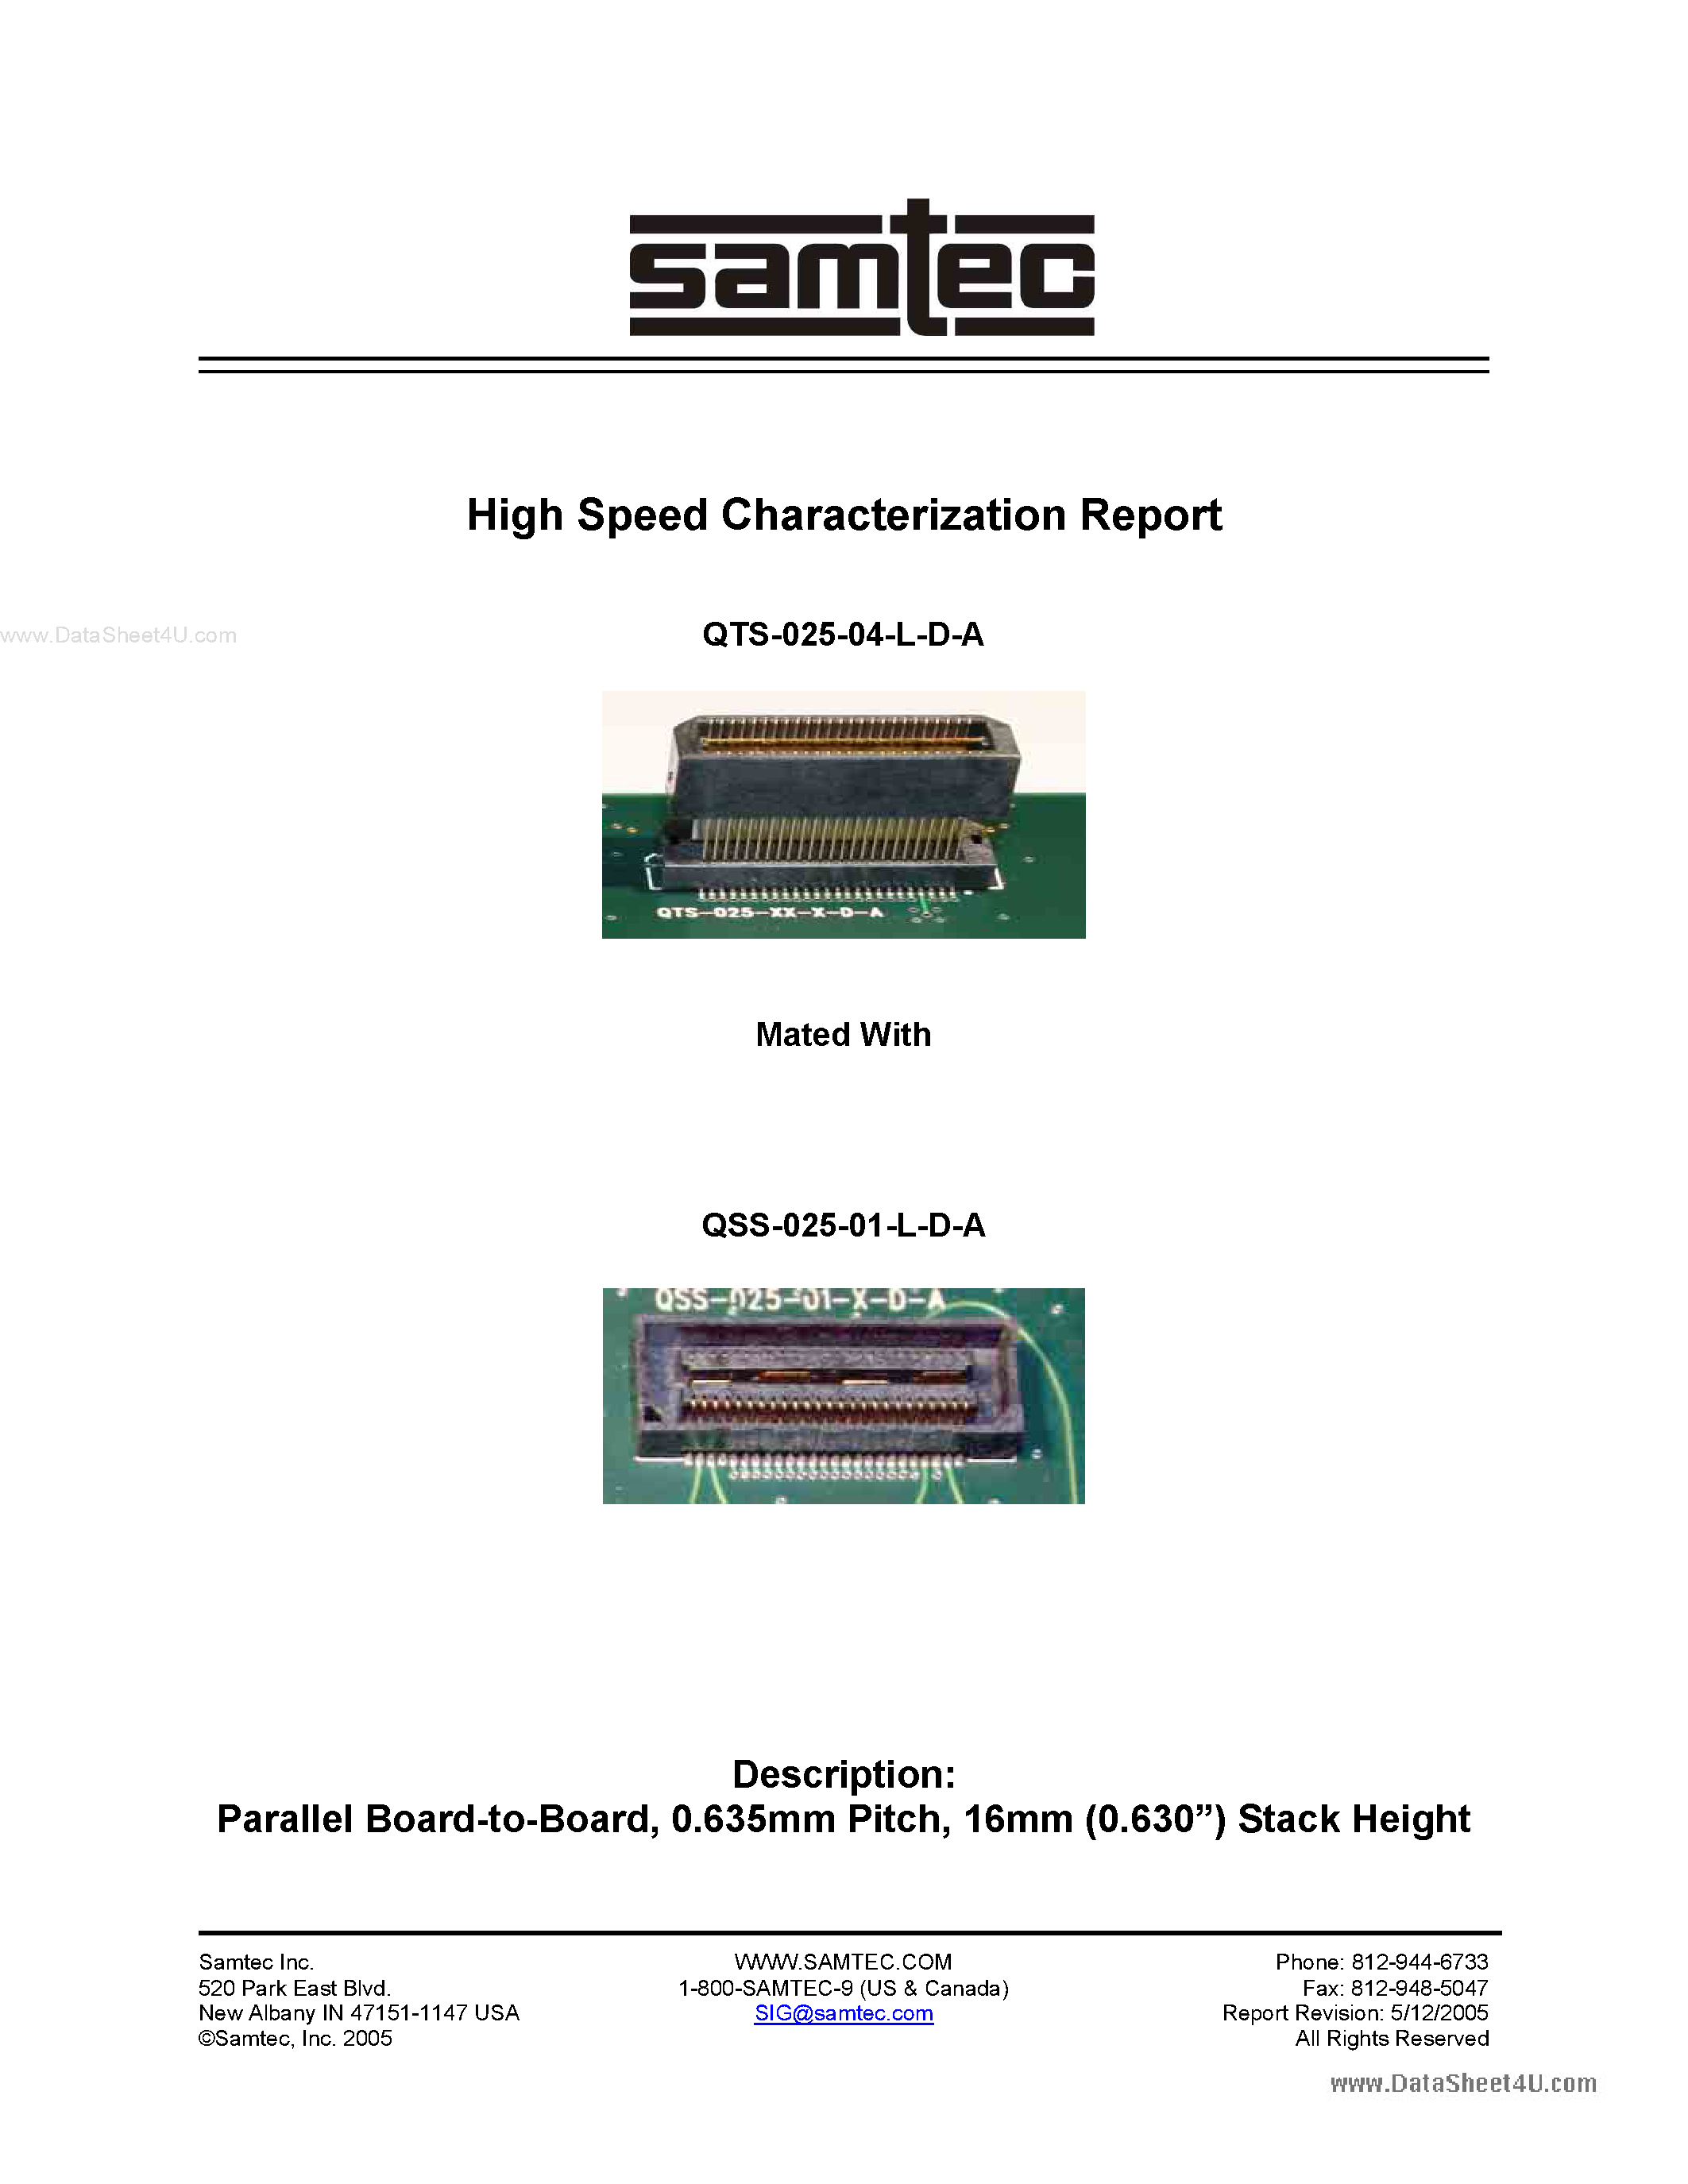 Datasheet QTS-025-04-L-D-A - High Speed Characterization page 1